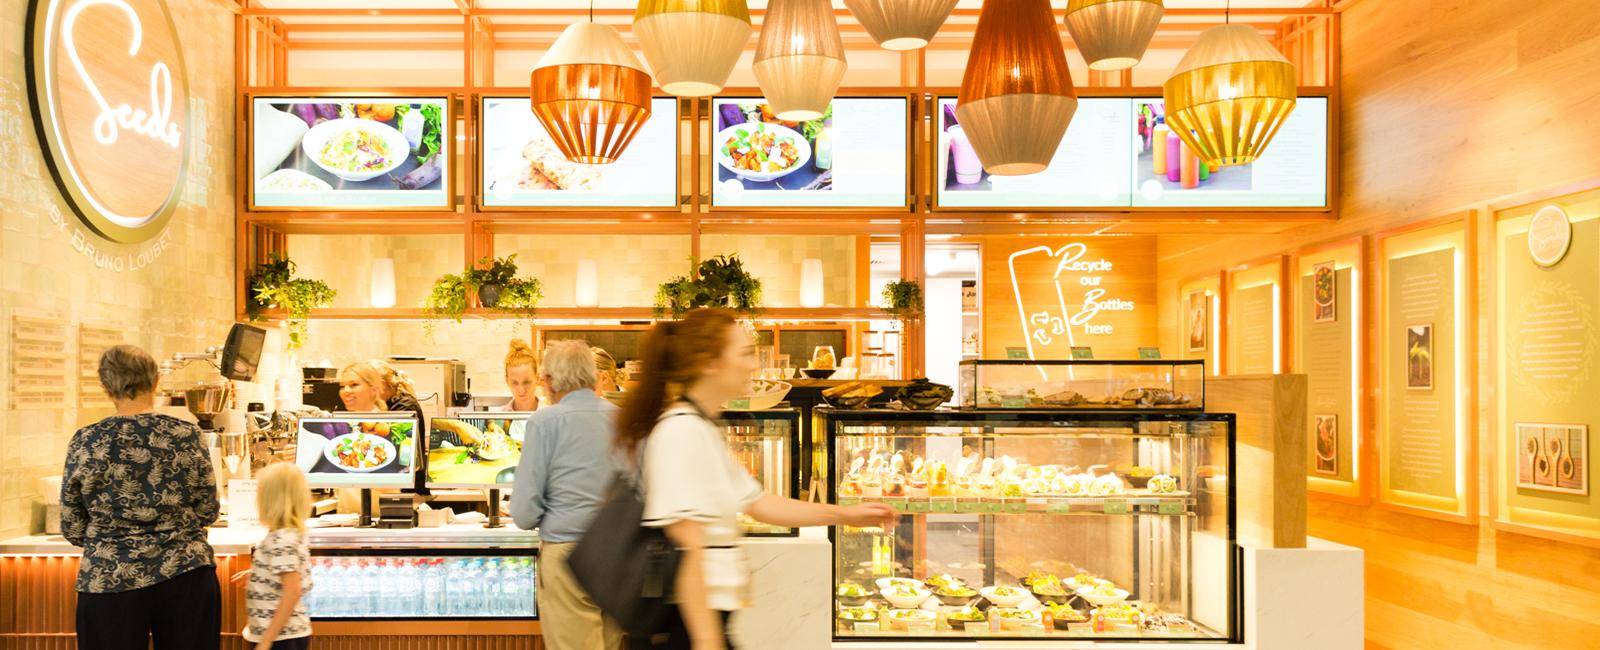 Seeds has opened at Brisbane Airport Domestic Terminal